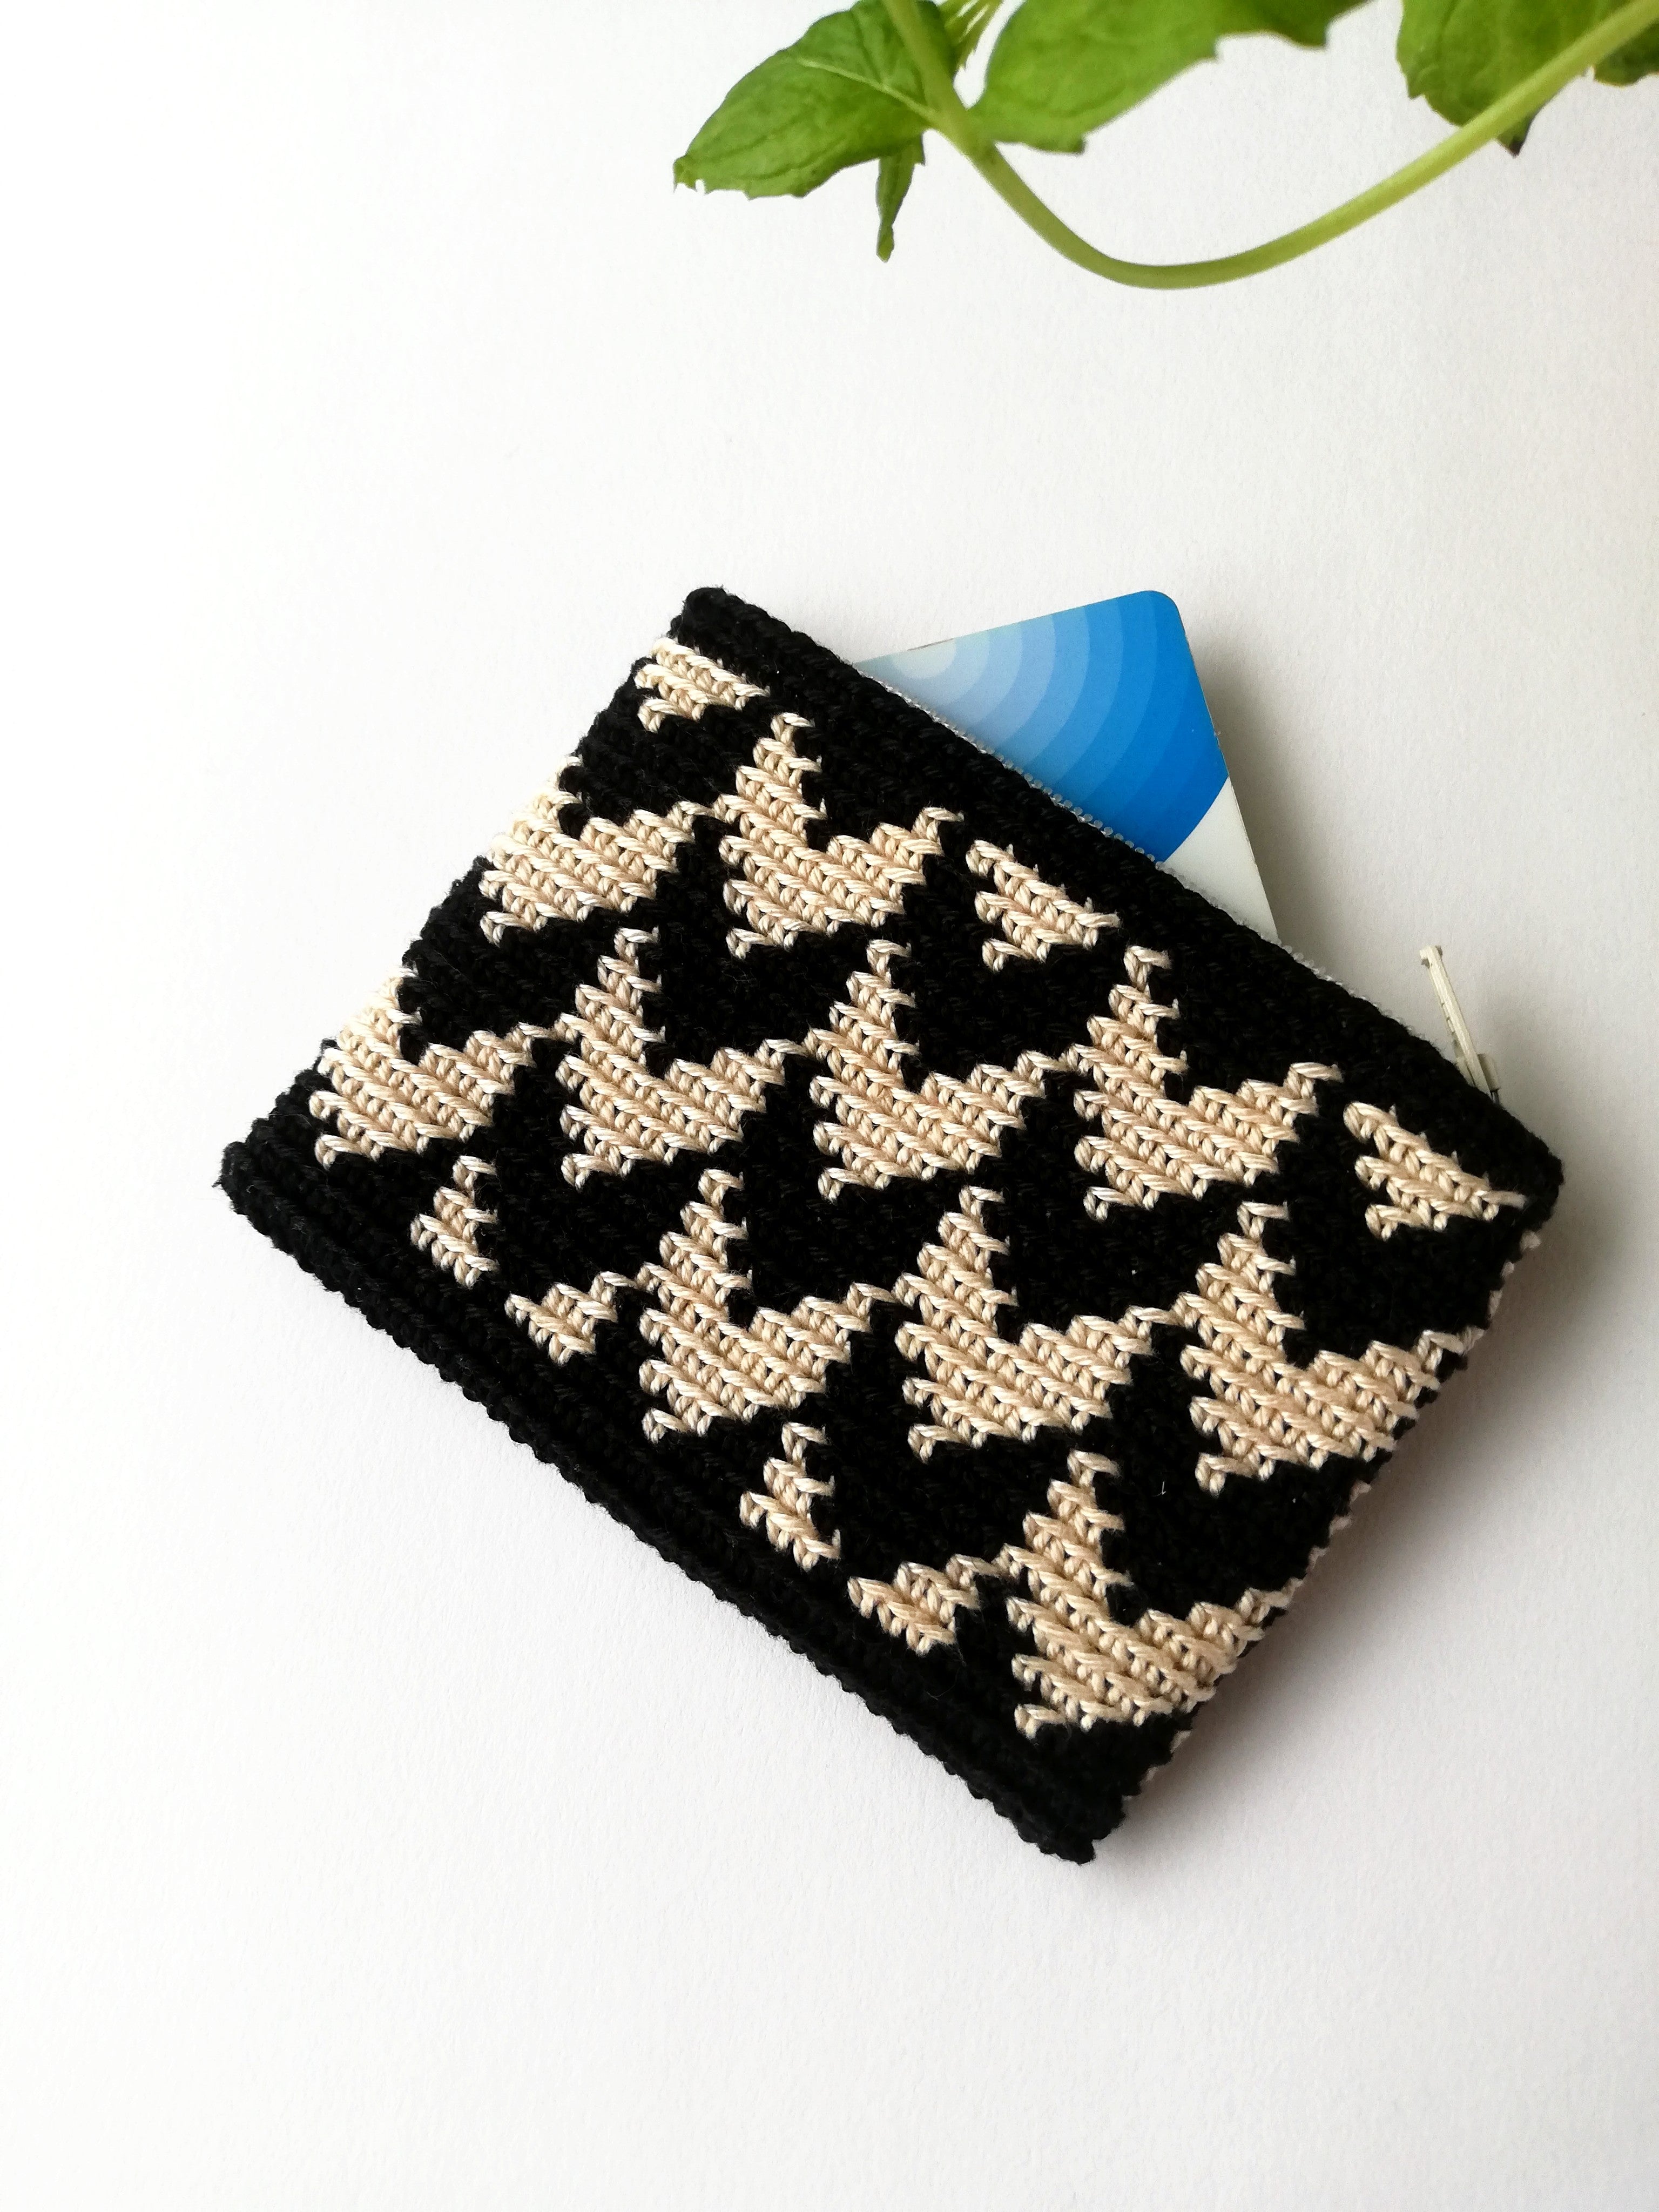 Symmetria TAPESTRY POUCH  Free TAPESTRY CROCHET pattern for bag WITH  LINING AND ZIPPER 